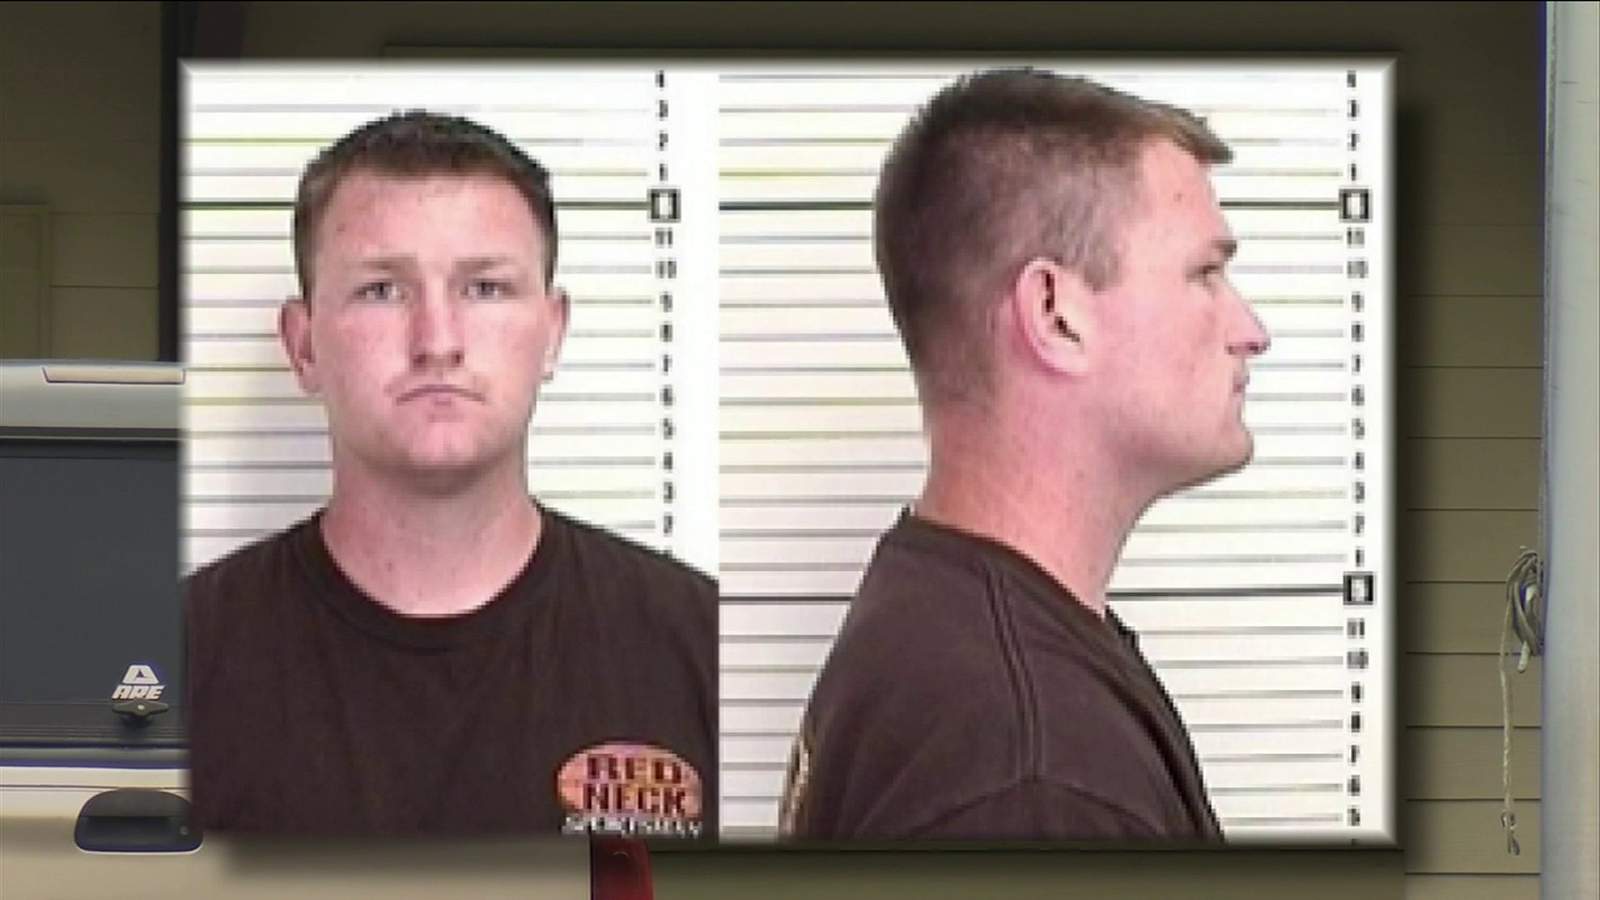 St. Marys firefighter accused of voyeurism